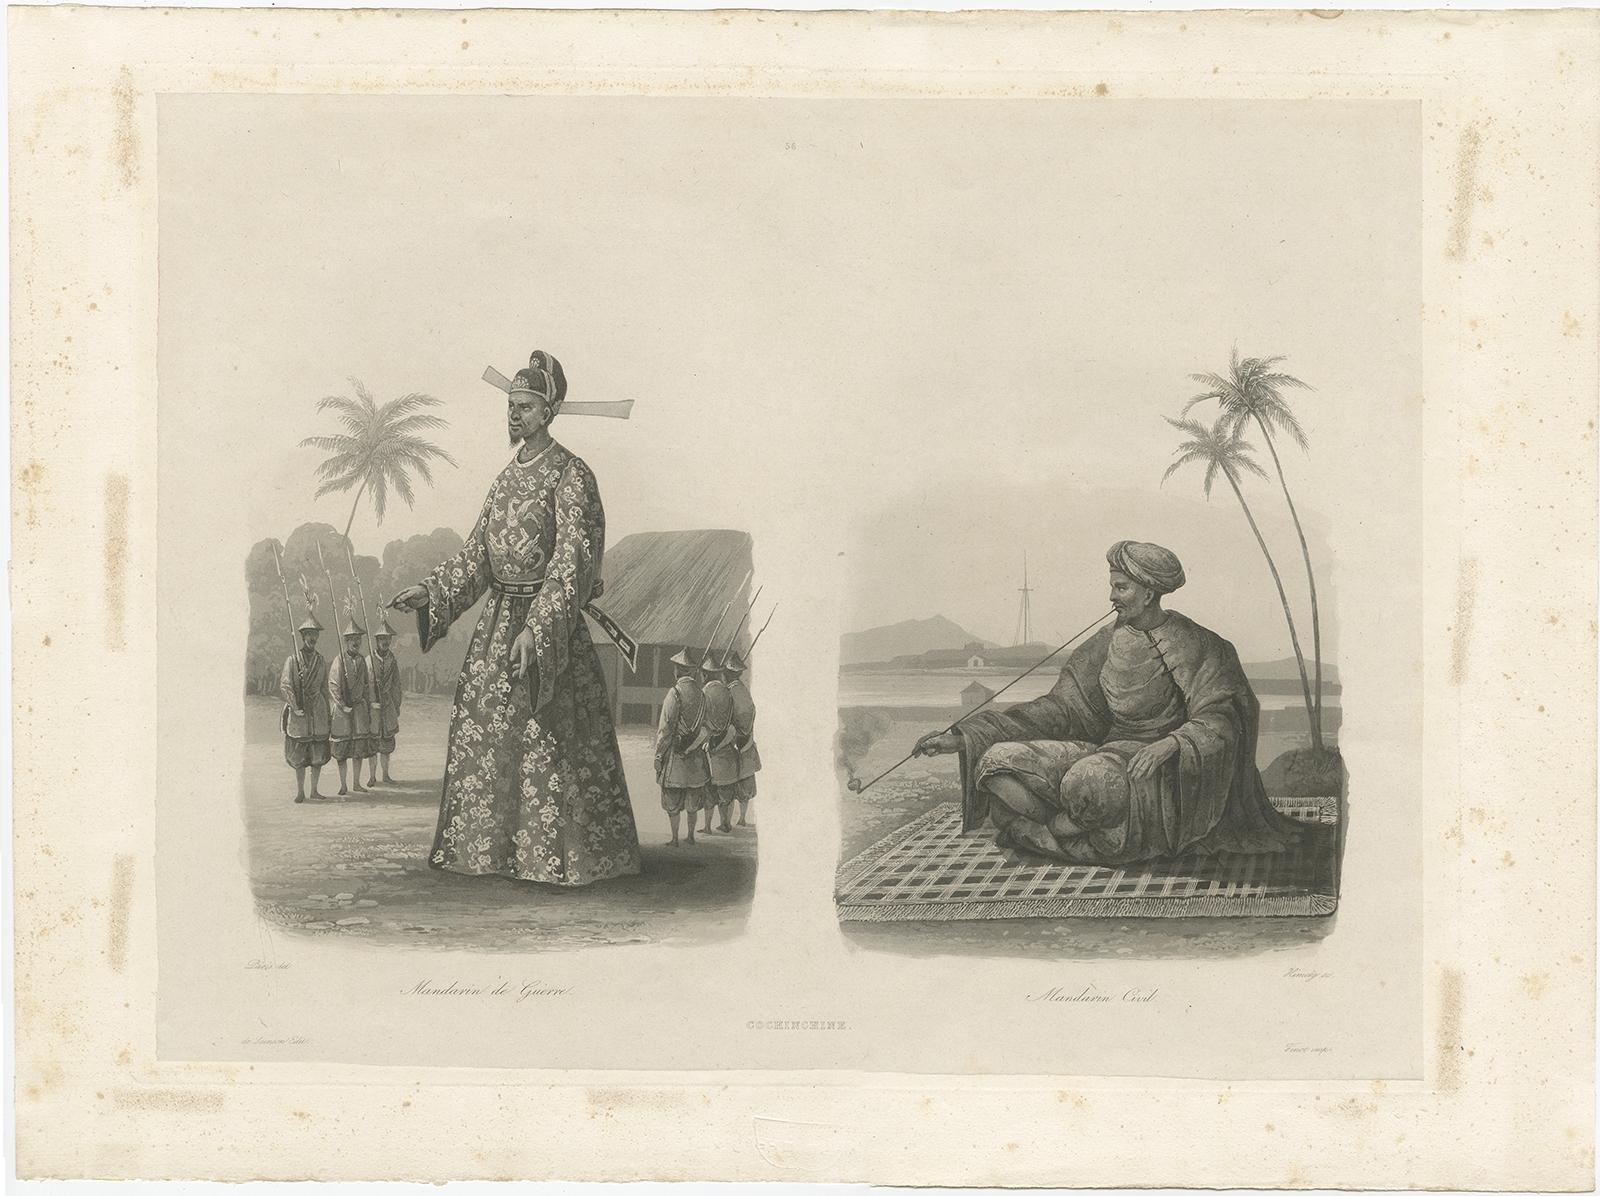 Antique print titled 'Cochinchine'. Two portaits of Vietnamese men one showing in military attire and the second in civilian dress. 

Cochinchina or Cochin-China is a historical exonym for part of Vietnam, depending on the contexts. Sometimes it